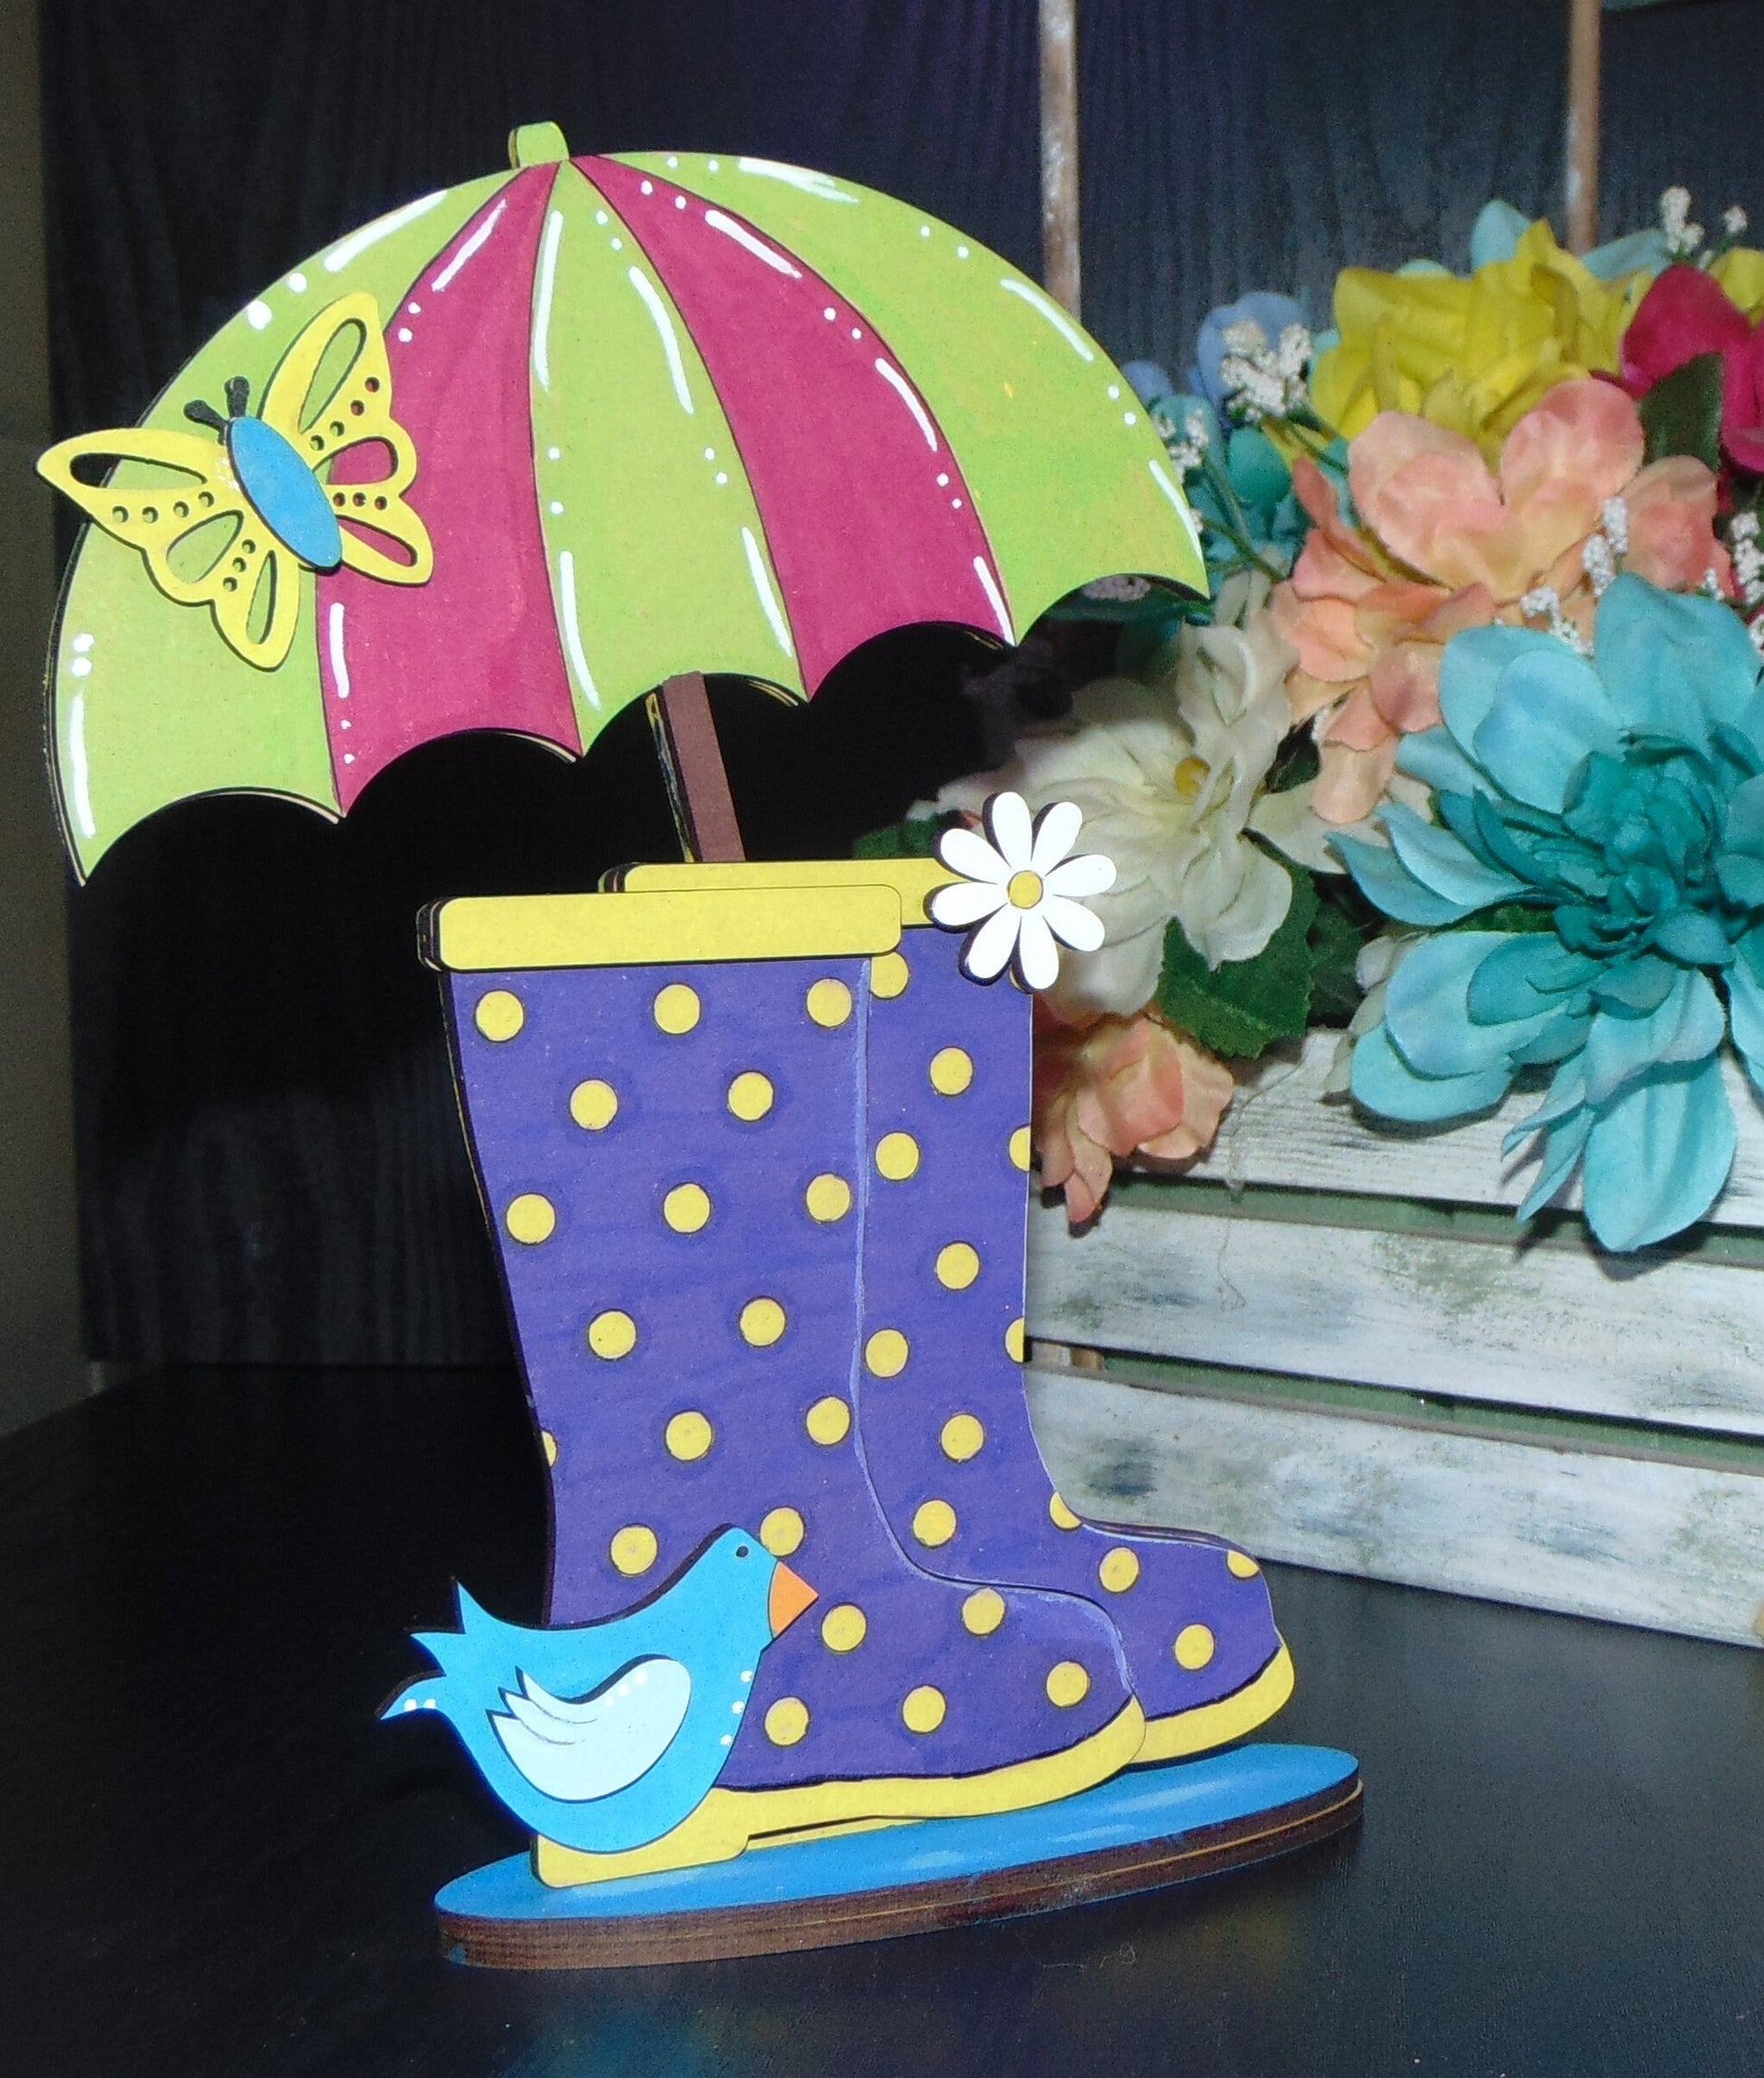 DIY Unfinished Rainboots & Umbrella MDF Shelf Sitter Set - Polka Dot Decor Clear Directions - Whimsical Decor - Crafters Delight - Gift Idea